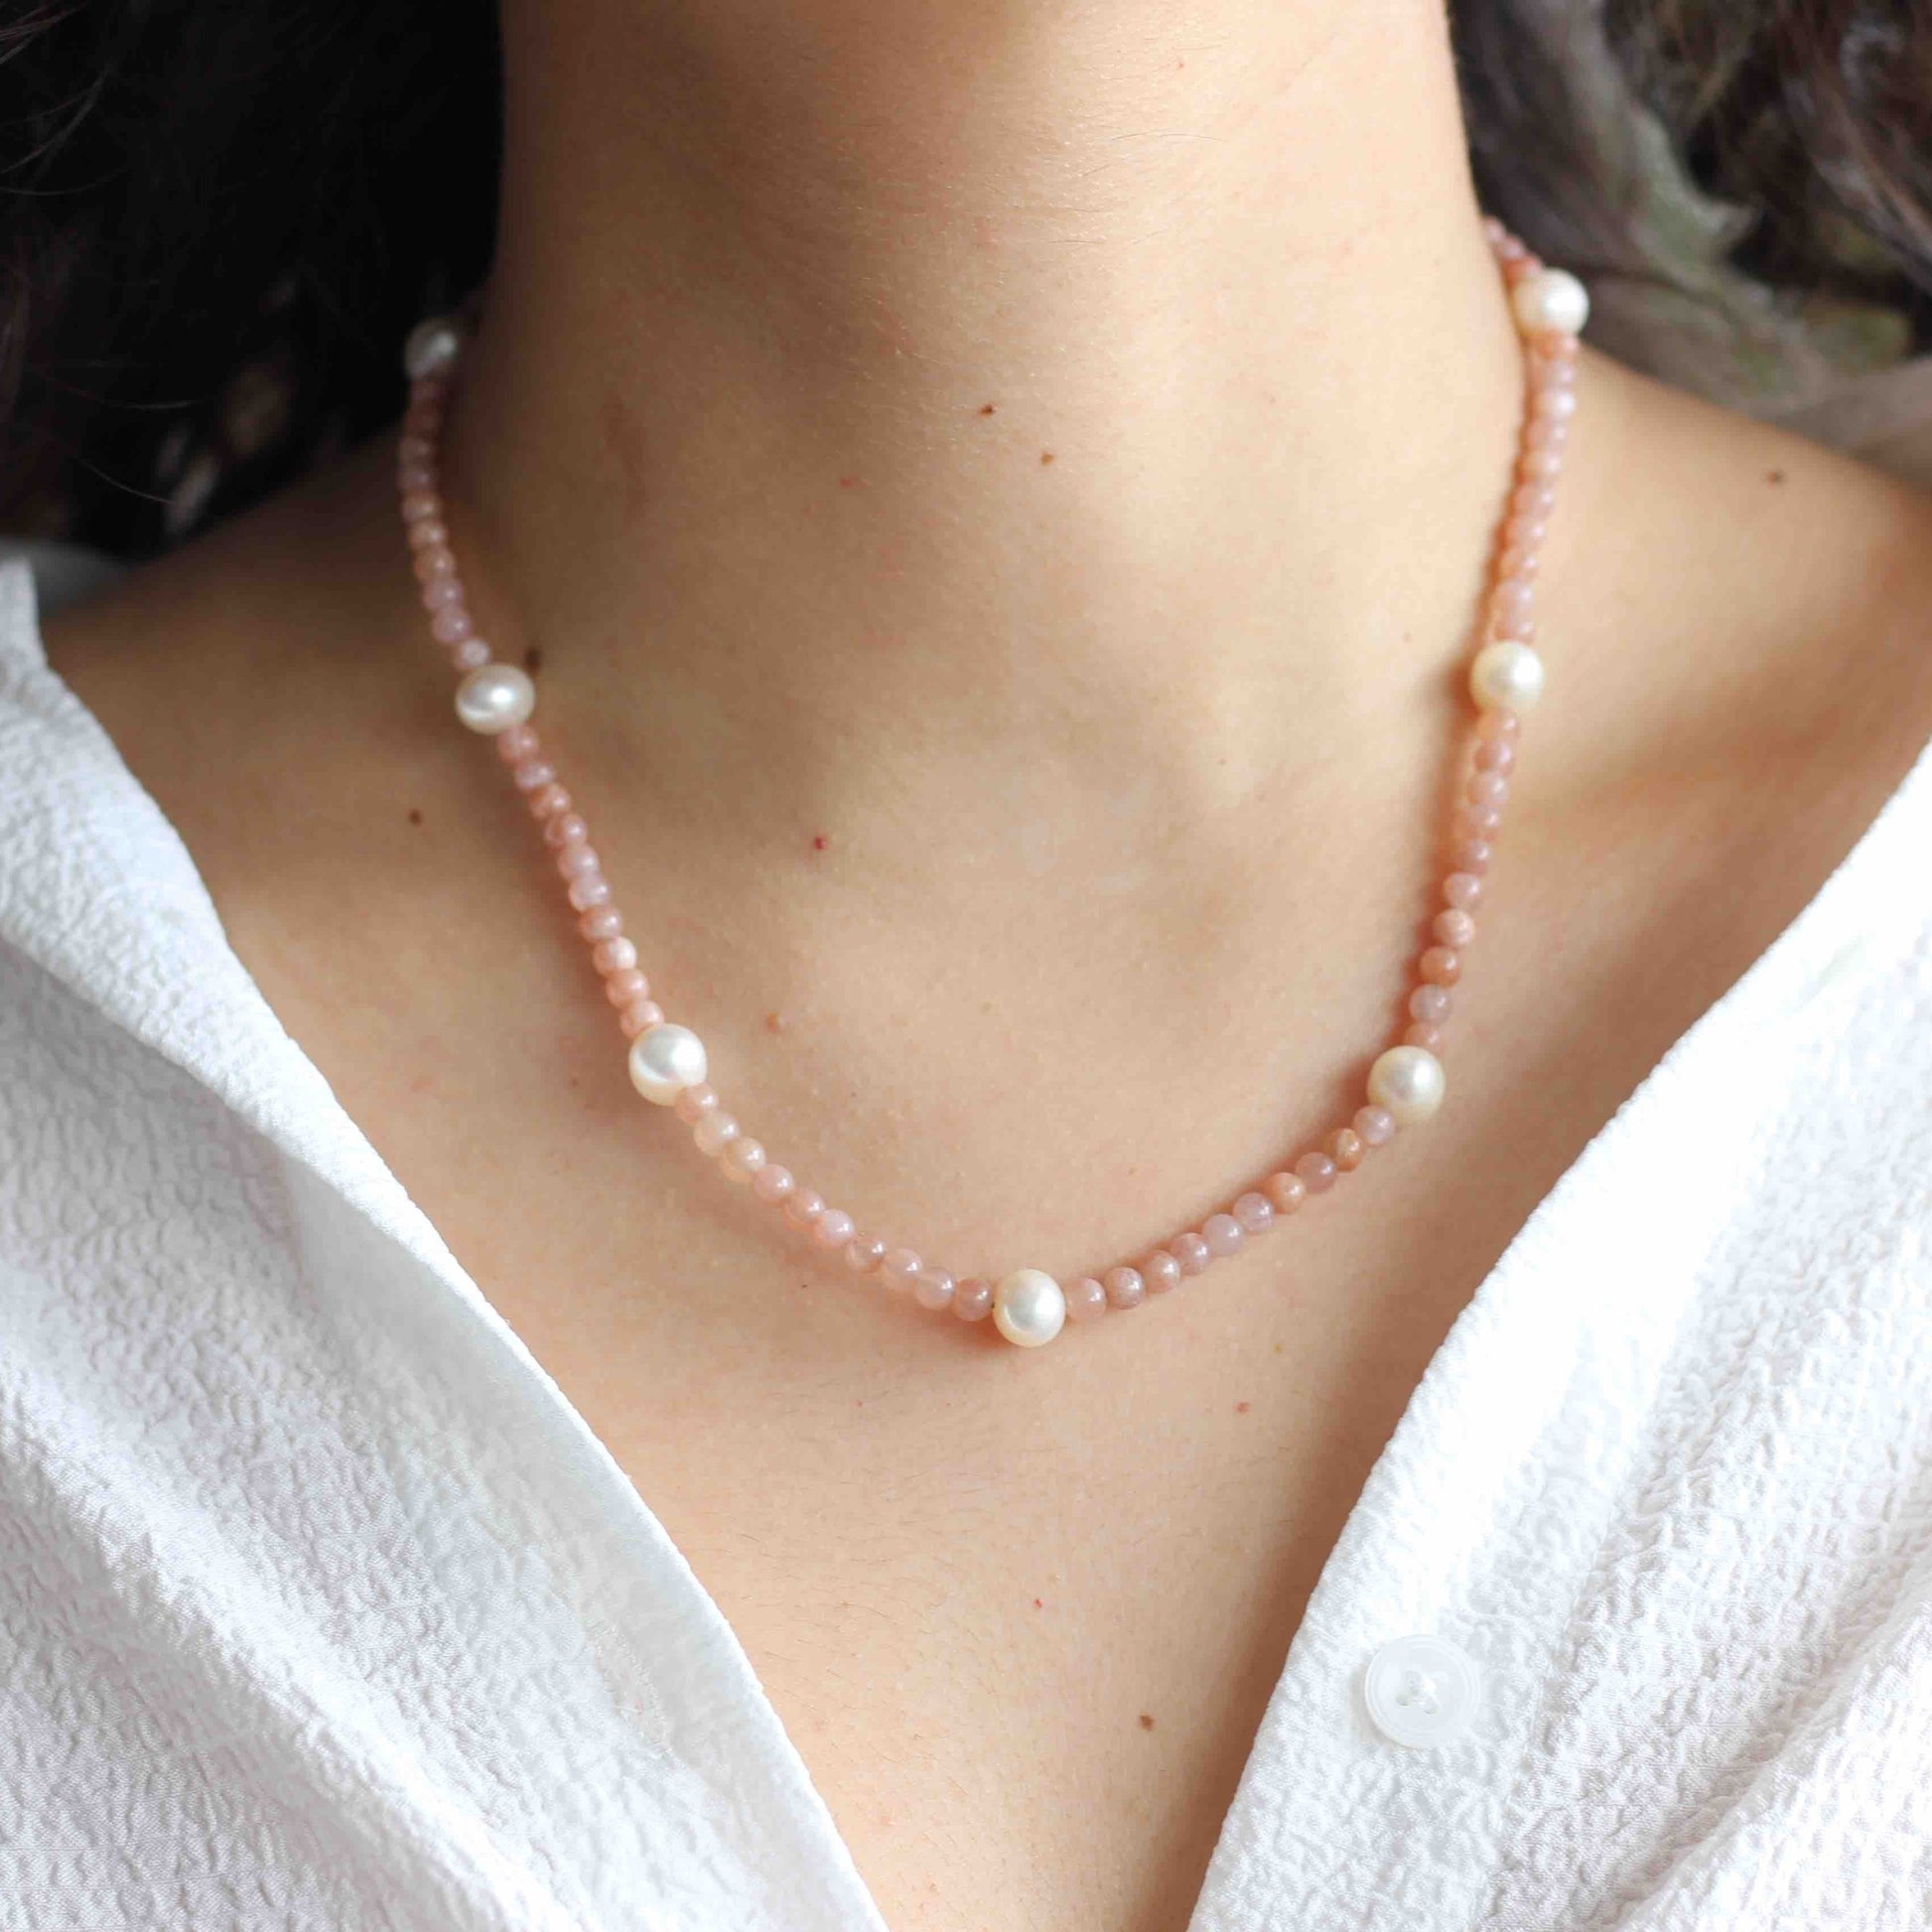 Pink Moonstone Pearl Necklace, Pearl Necklace, Moonstone Necklace, Gemstone Necklace, Necklace for Women, Moonstone Jewelry